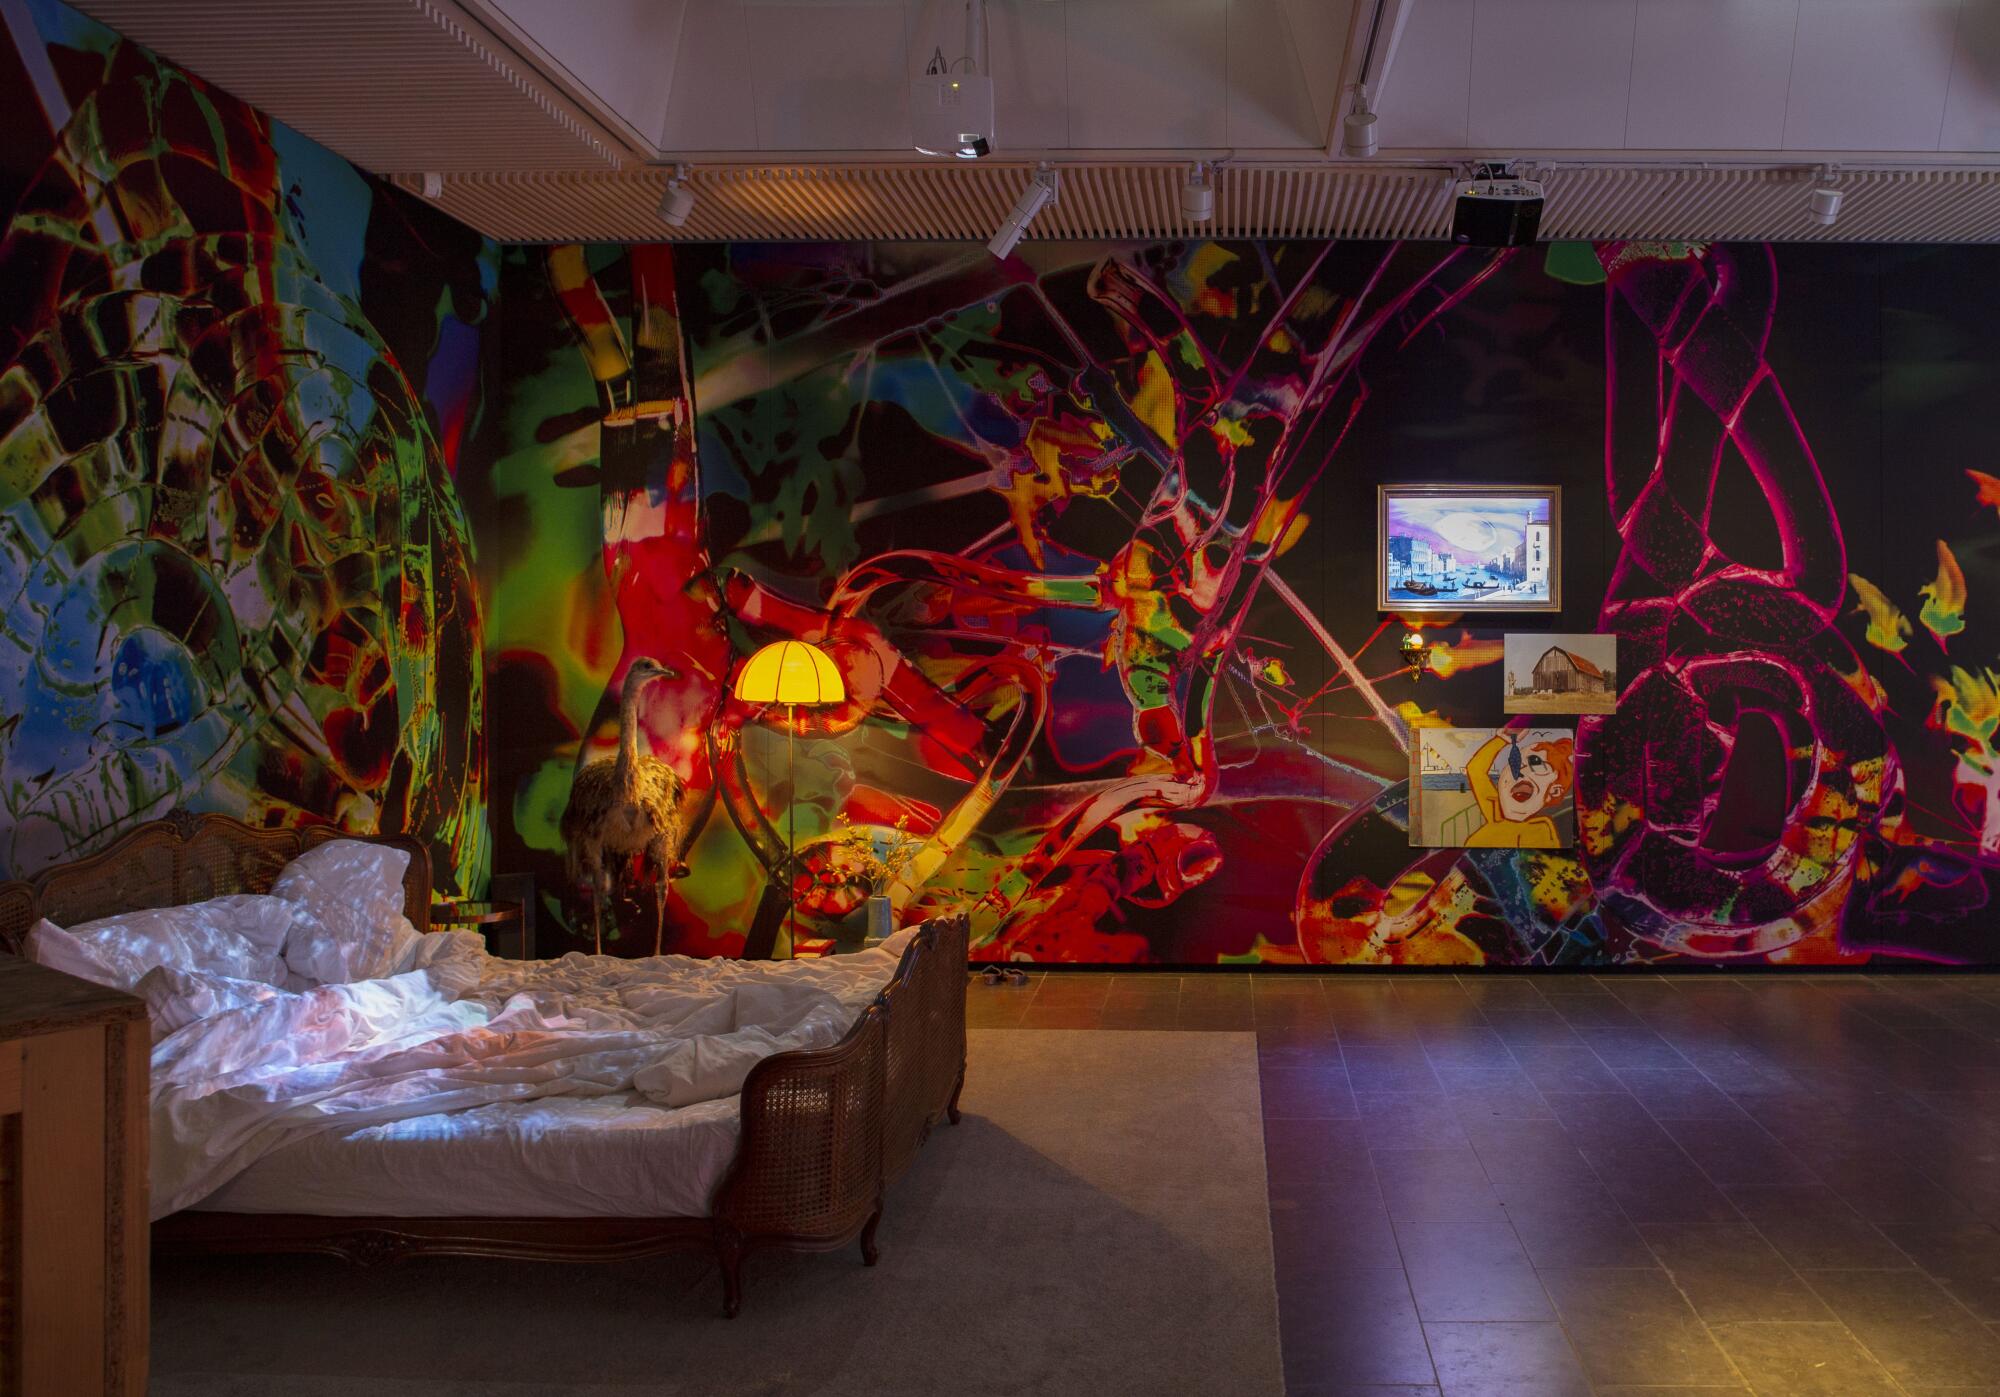 A gallery view shows a bed with video projections and walls covered in wallpapers that evoke dense vegetation